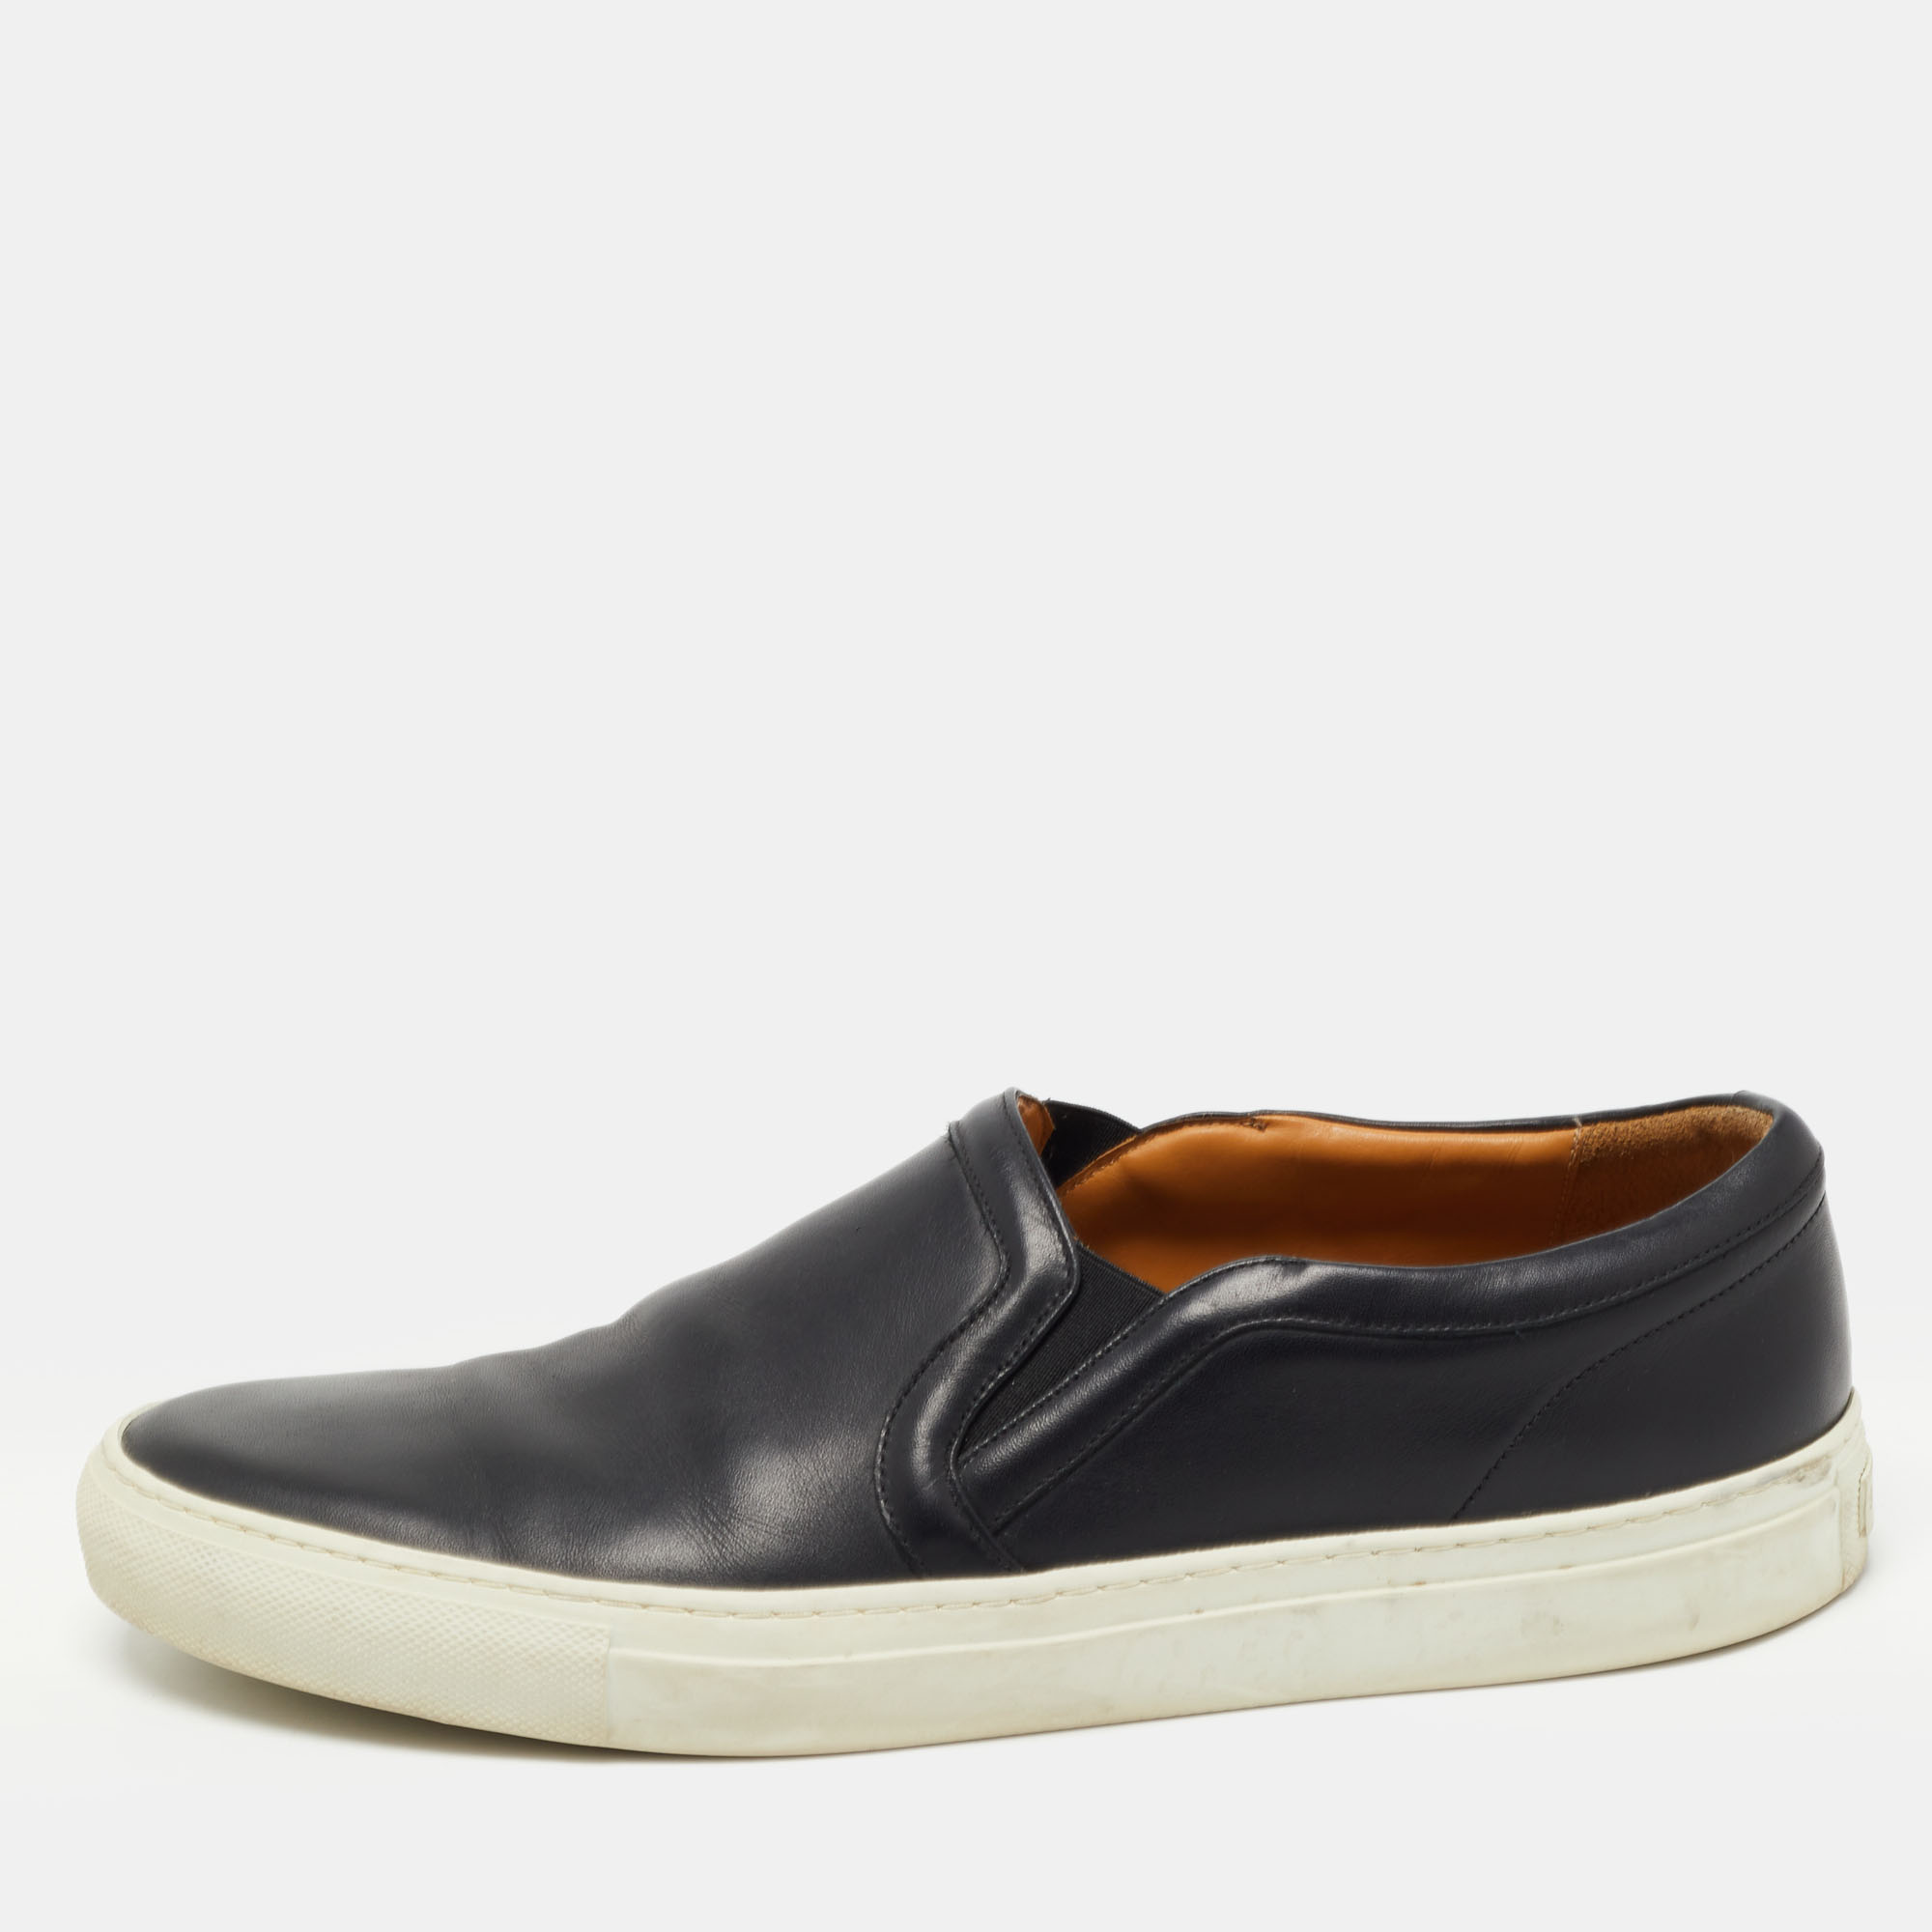 Givenchy black leather slip on sneakers size 44